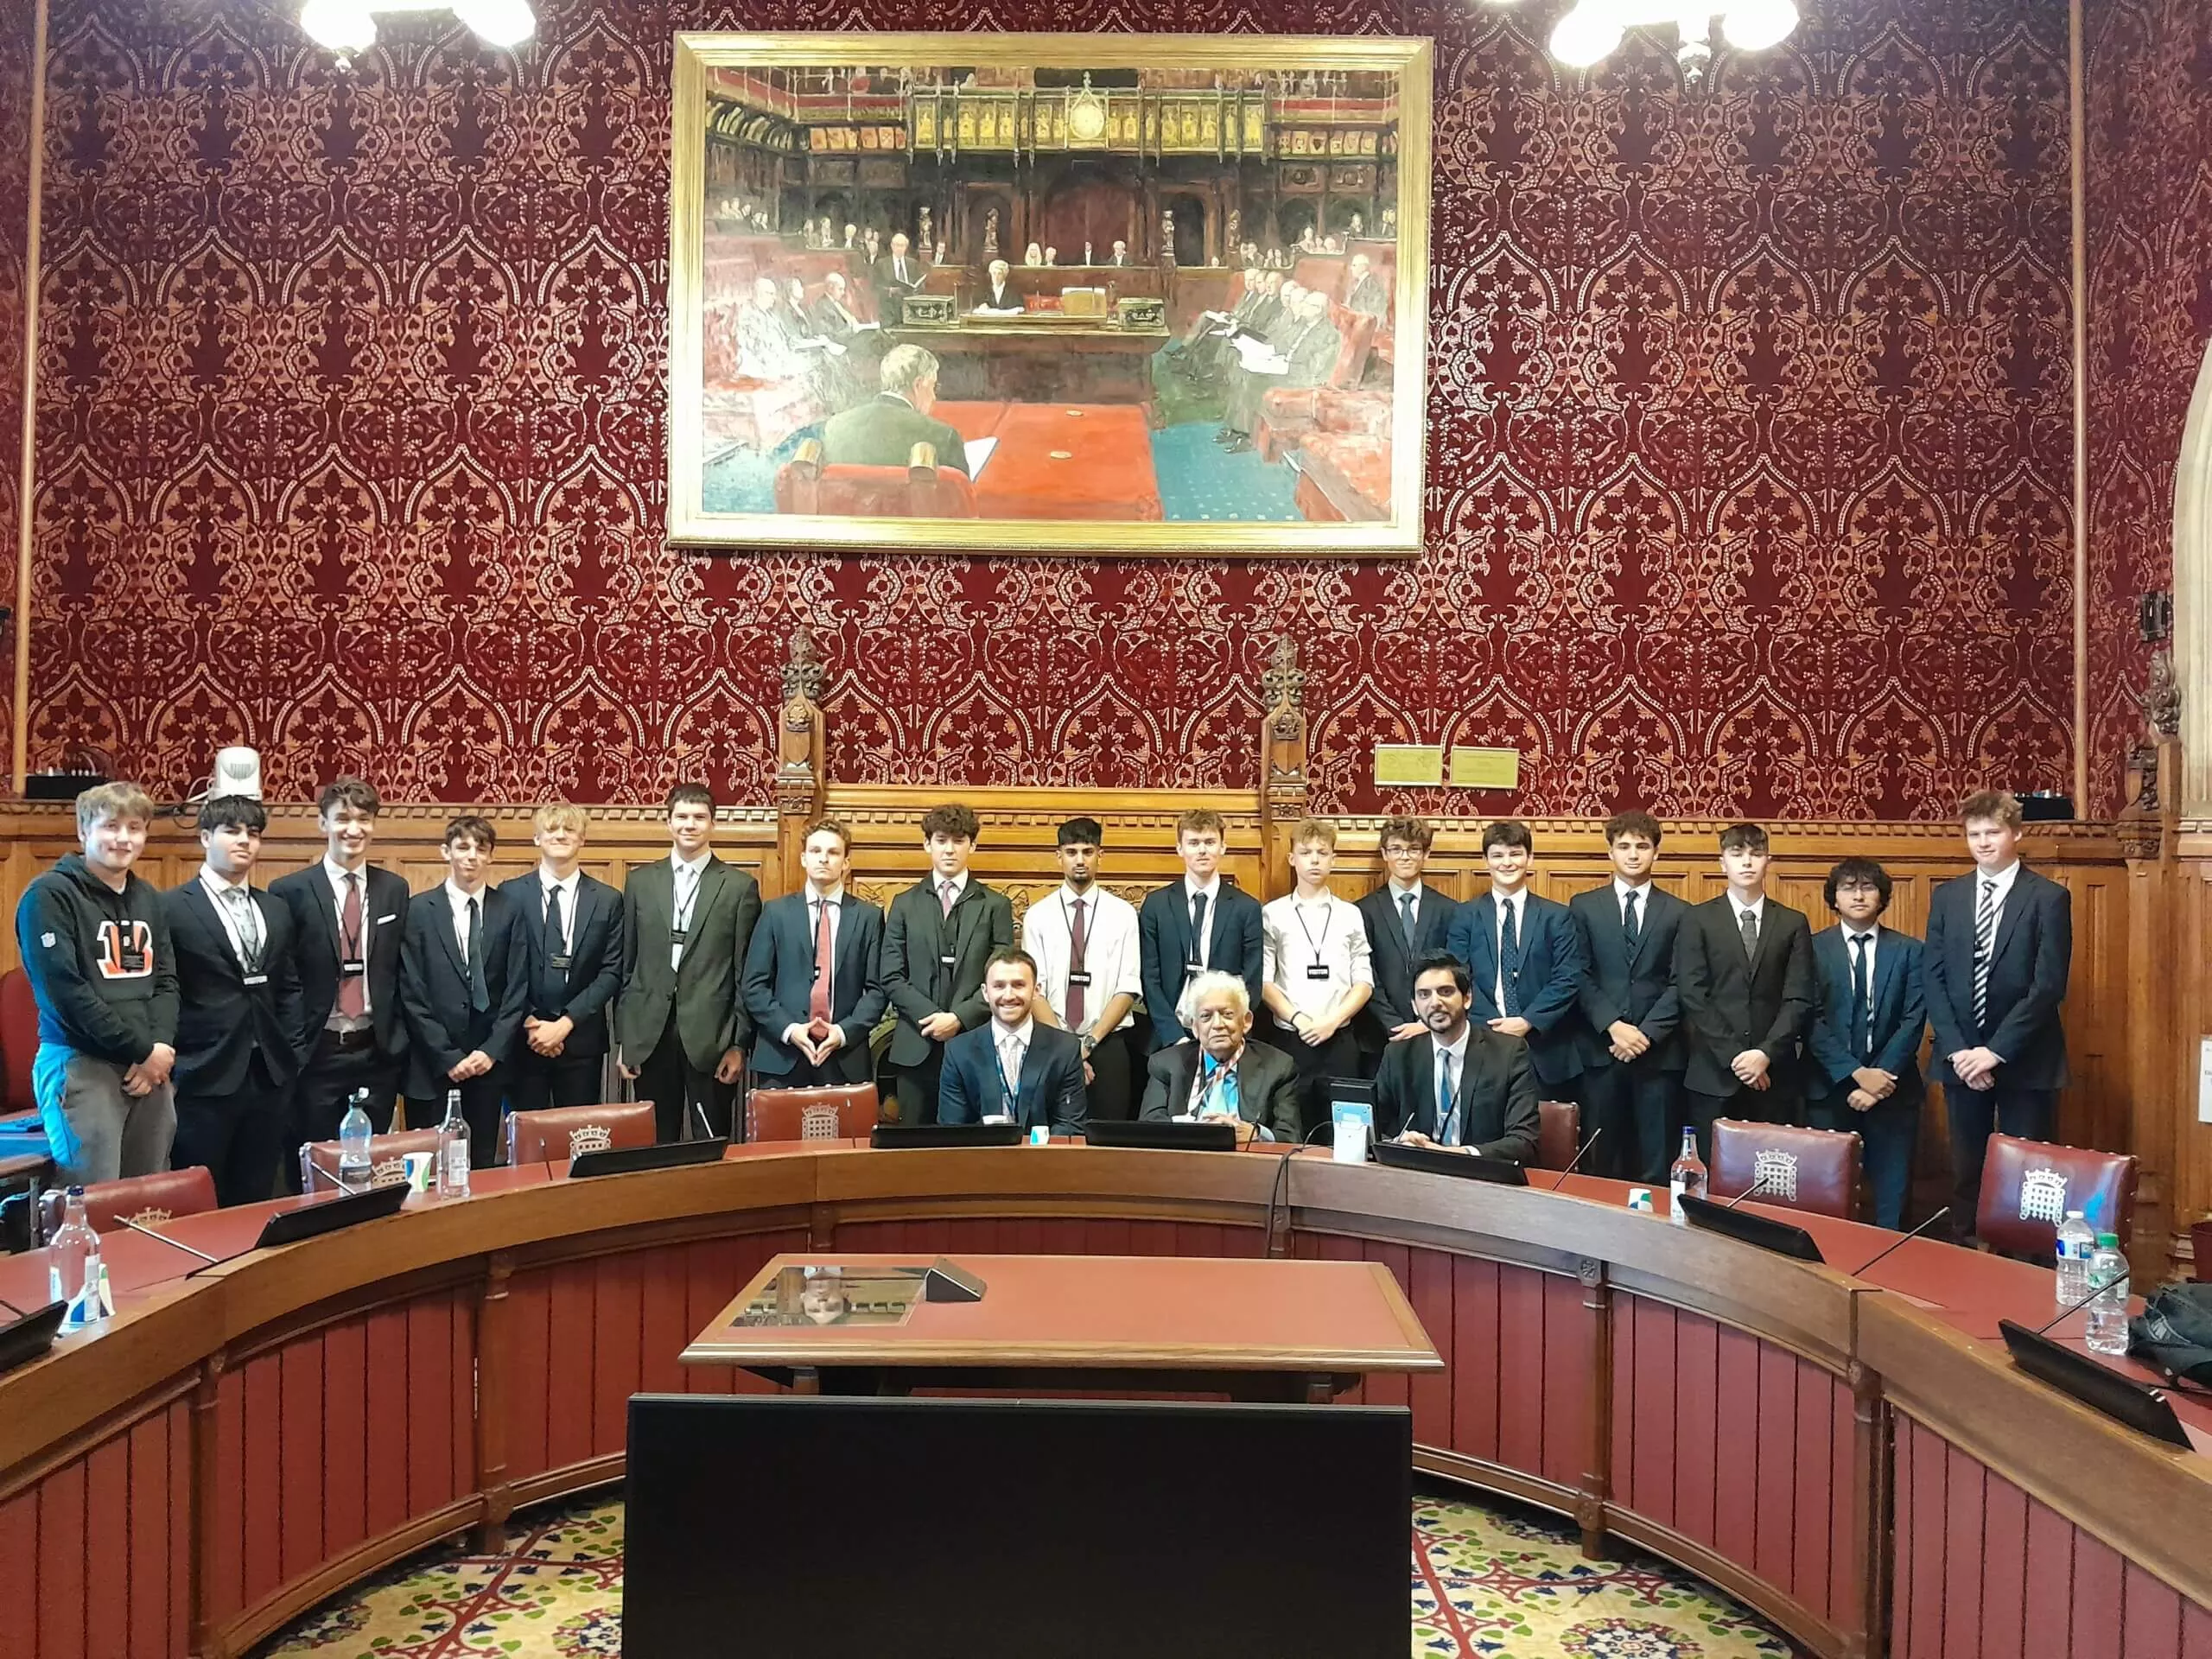 Ghandi Commemoration and Tour of Parliament